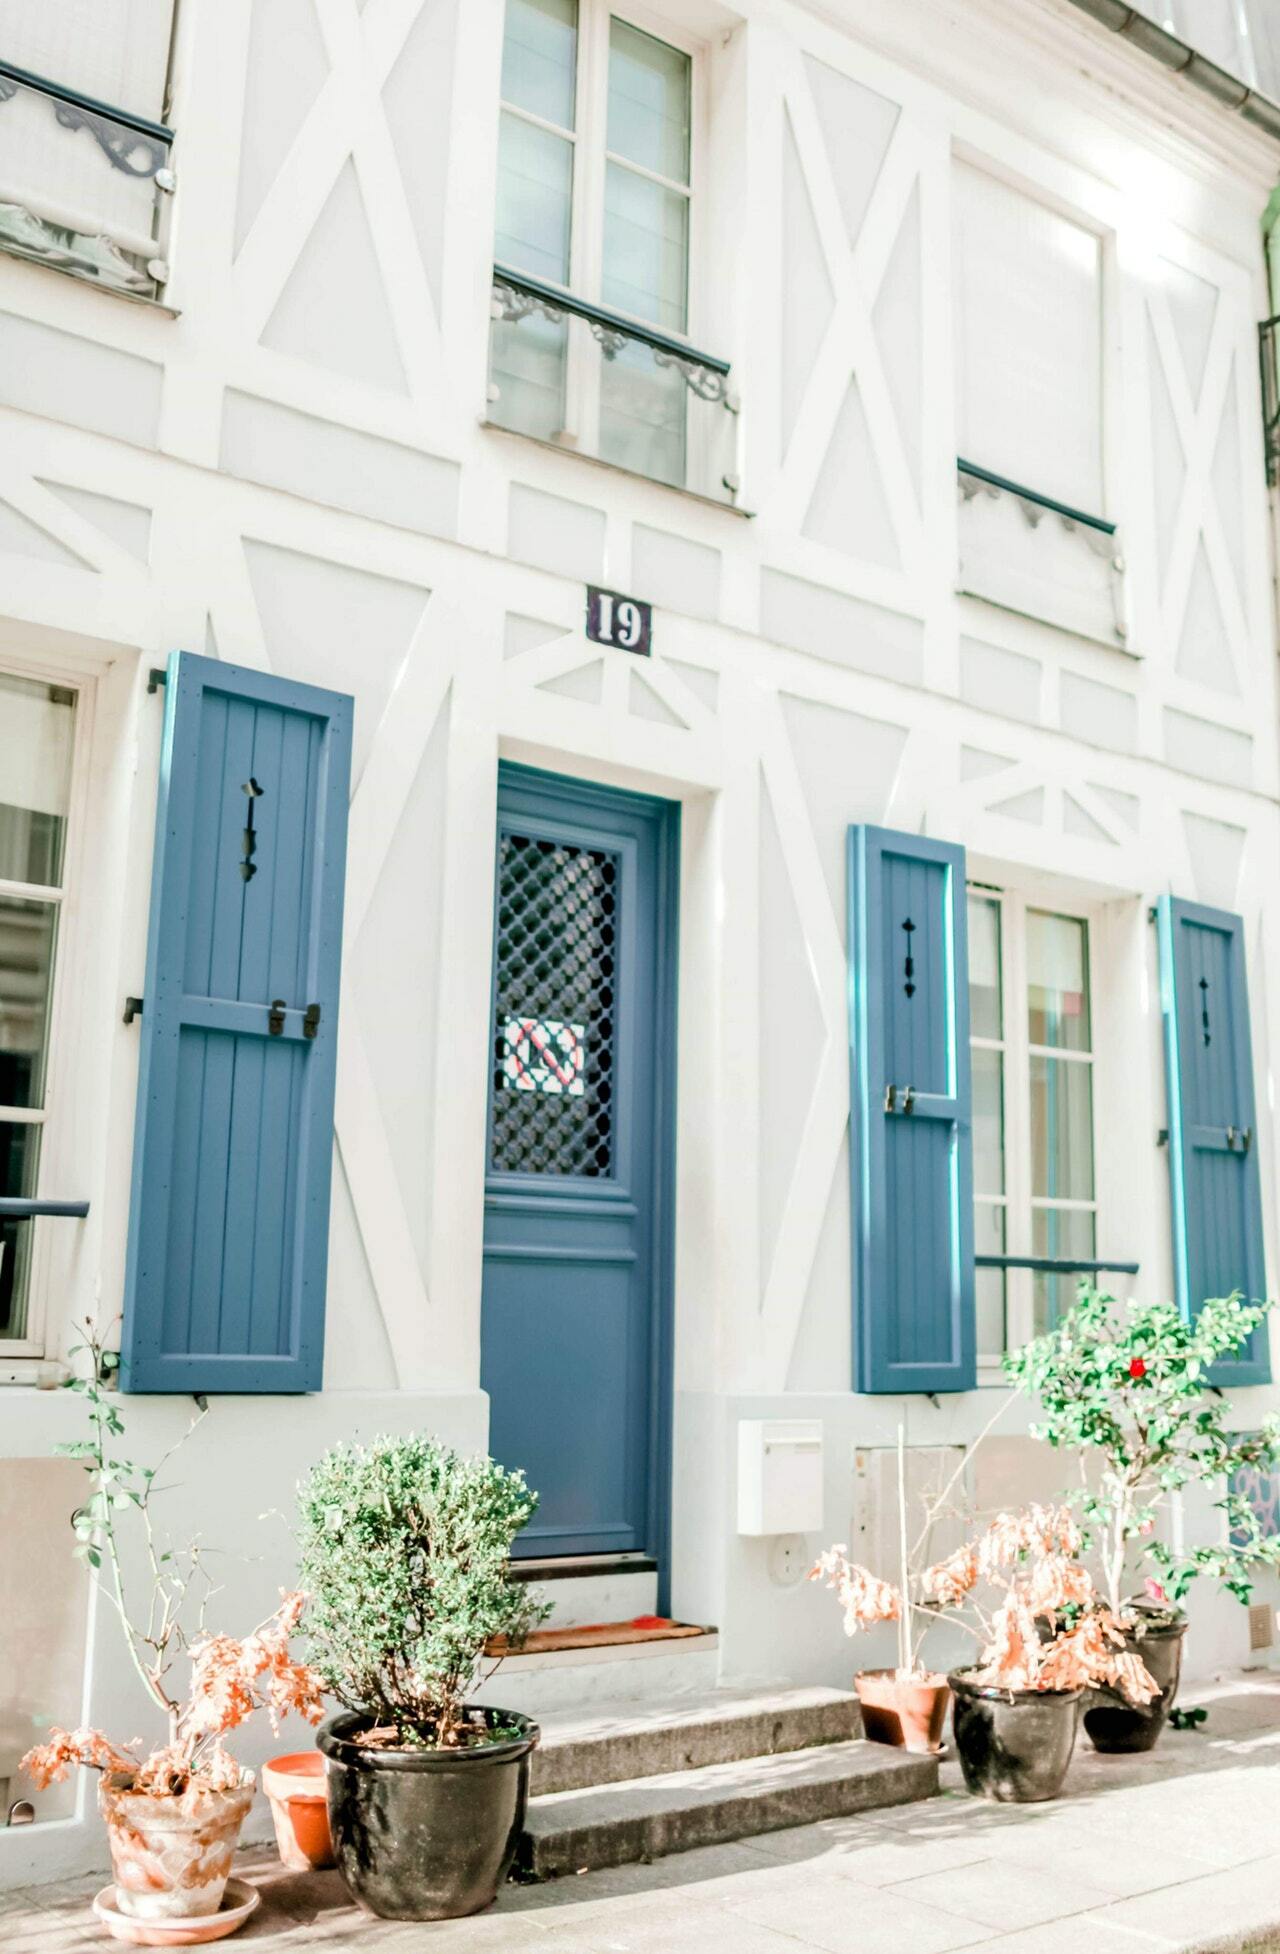 5 Ways to Spruce Up Your Home’s Exterior